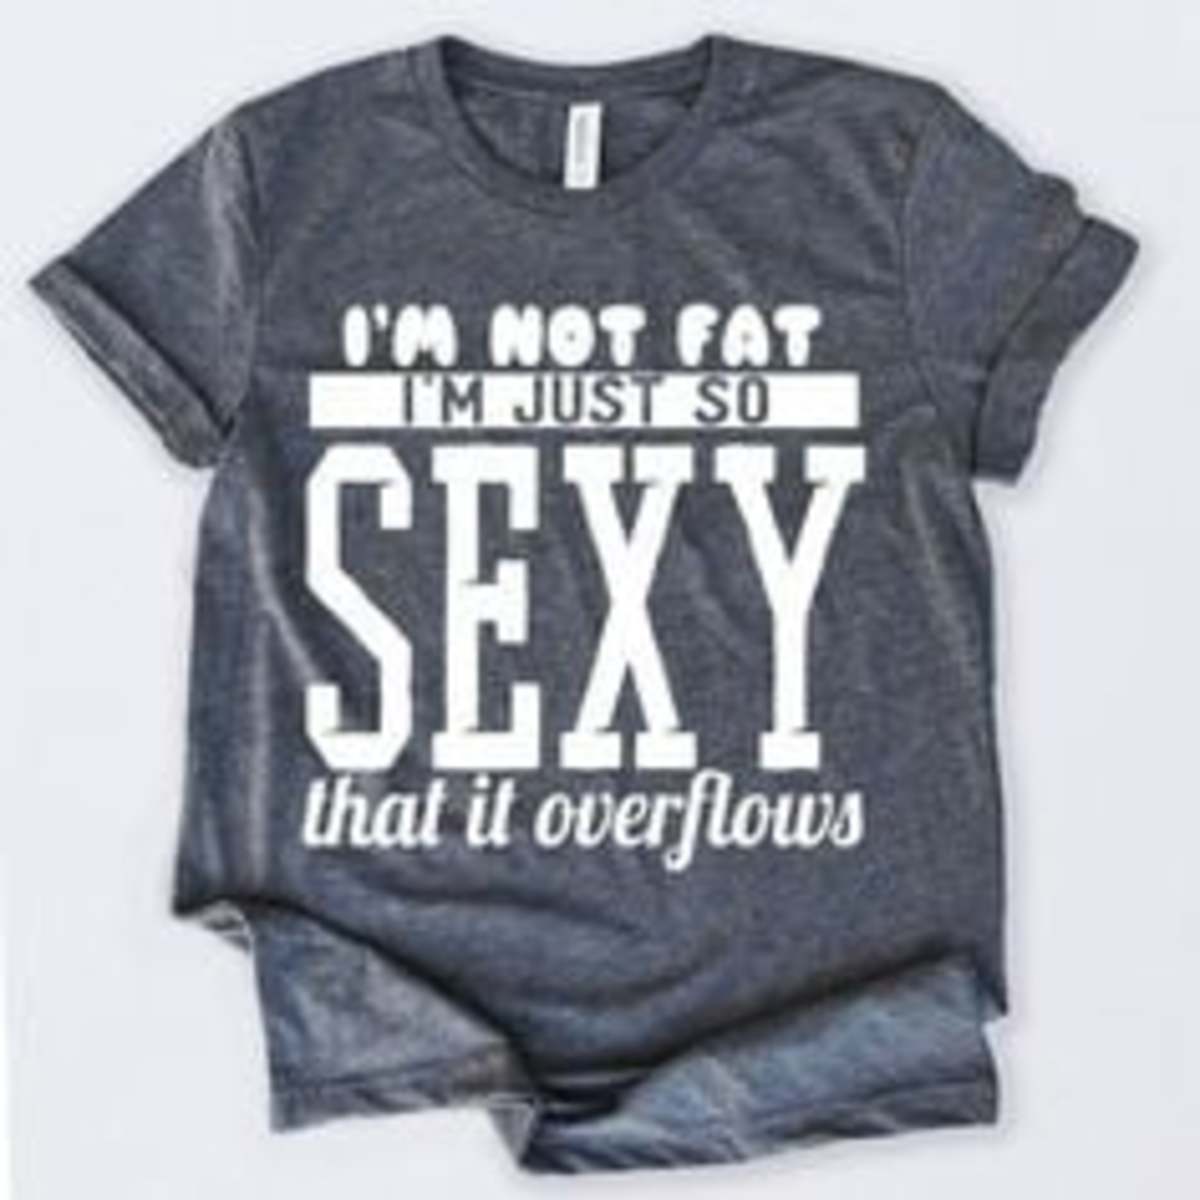 Hilarious shirt....I love it, but I would never wear it.